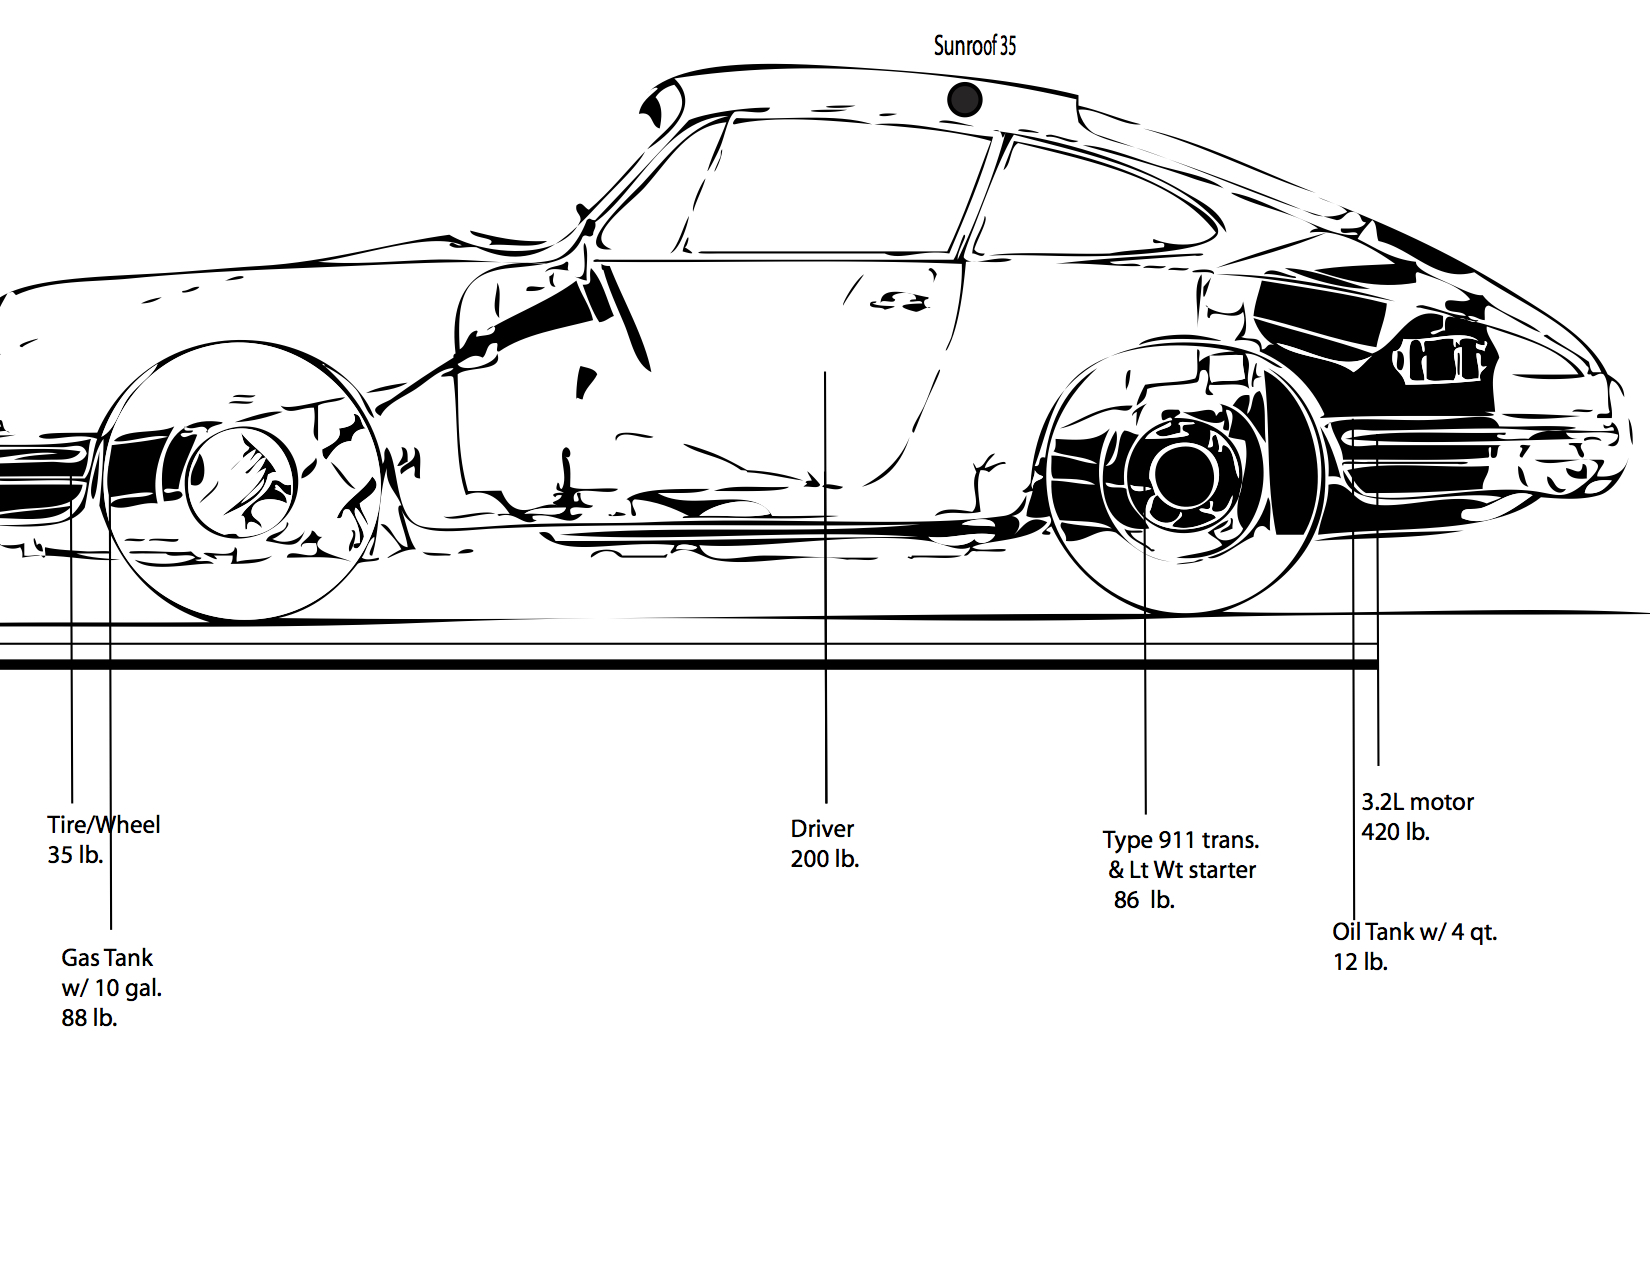 Cg of 911 - Calculation showing major wt components.jpg